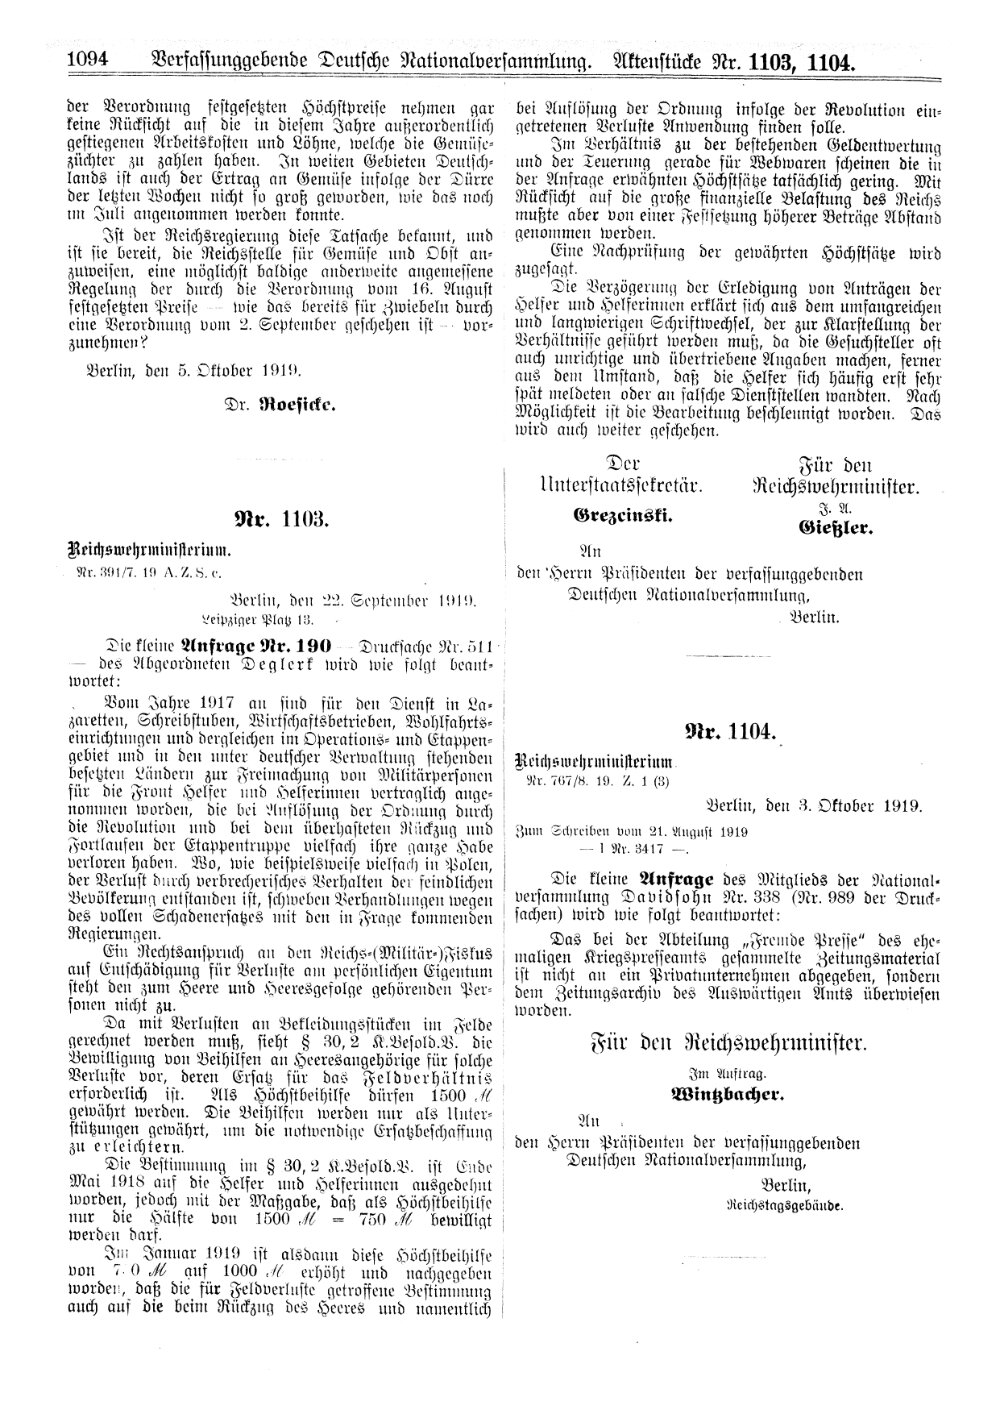 Scan of page 1094